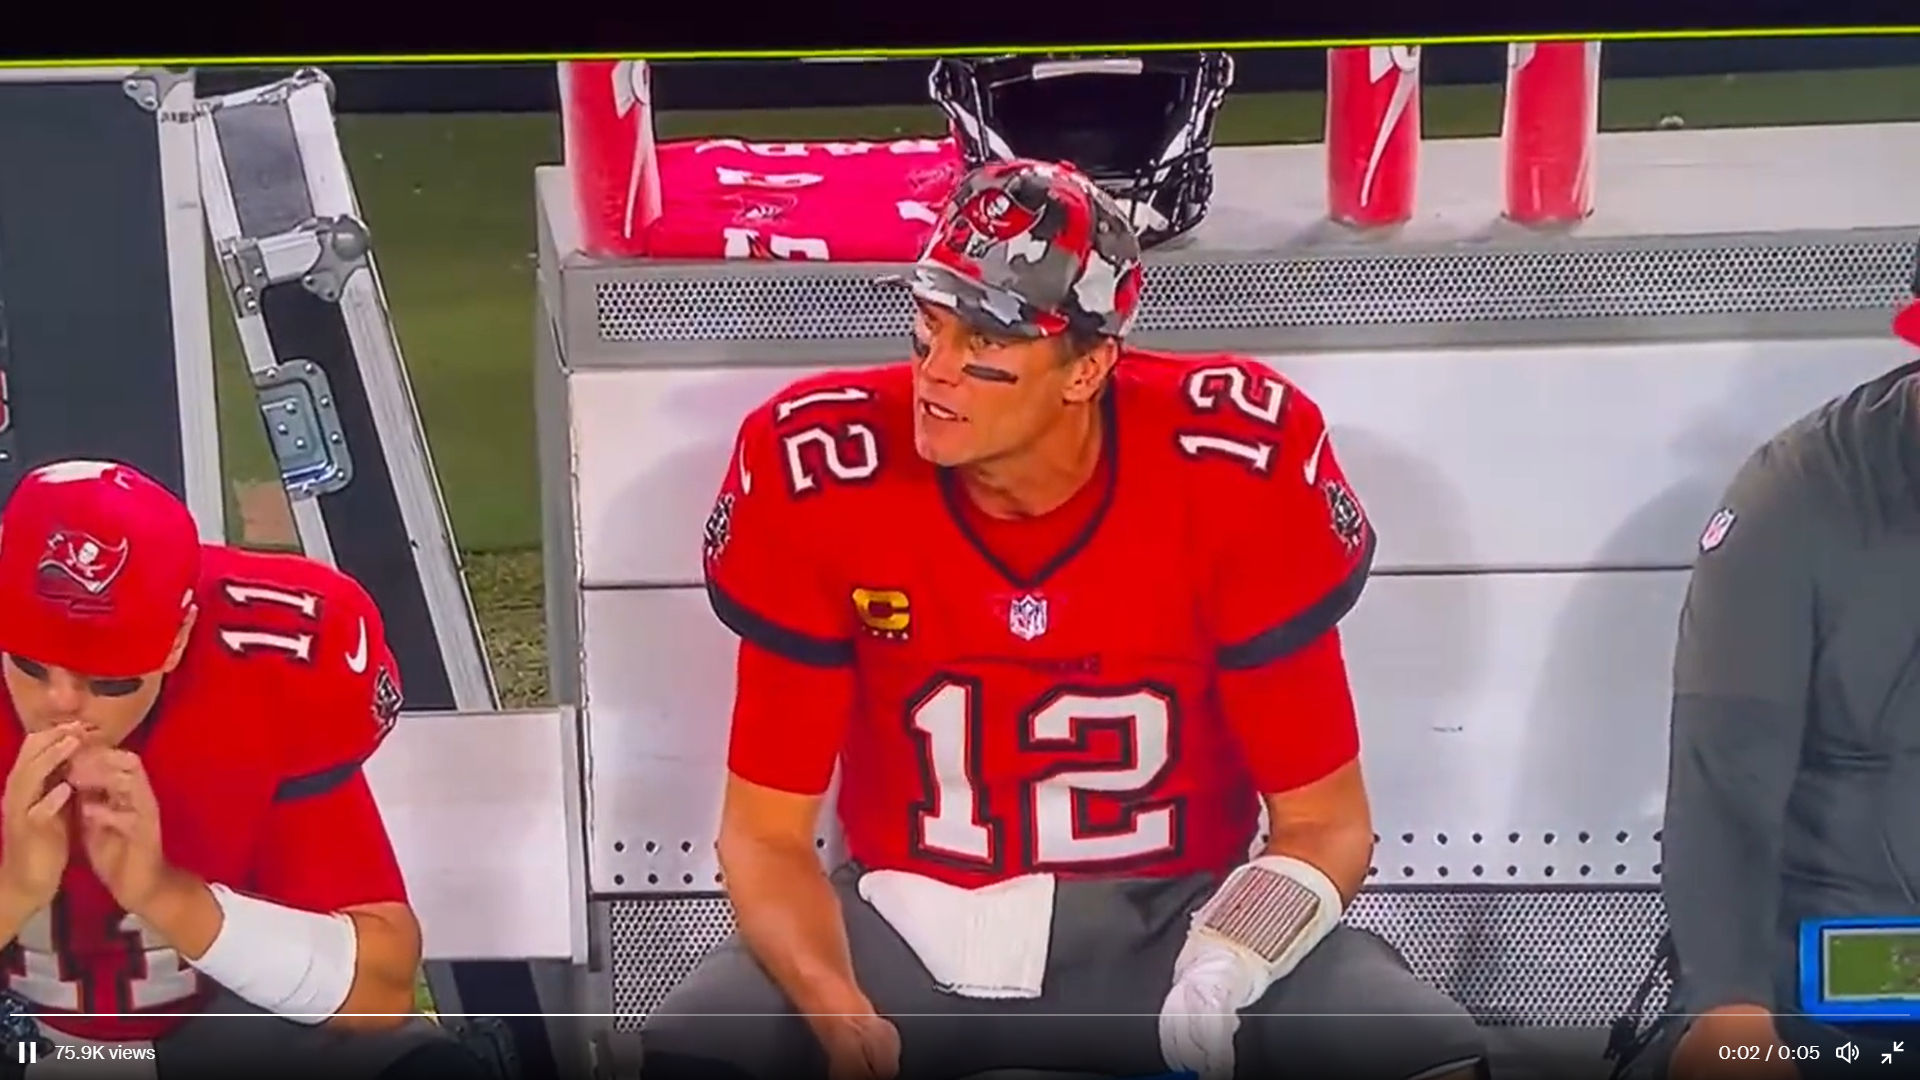 Tampa Bay Buccaneers’ Tom Brady ‘losing his mind’ at sideline during MNF game vs New Orleans Saints: Watch